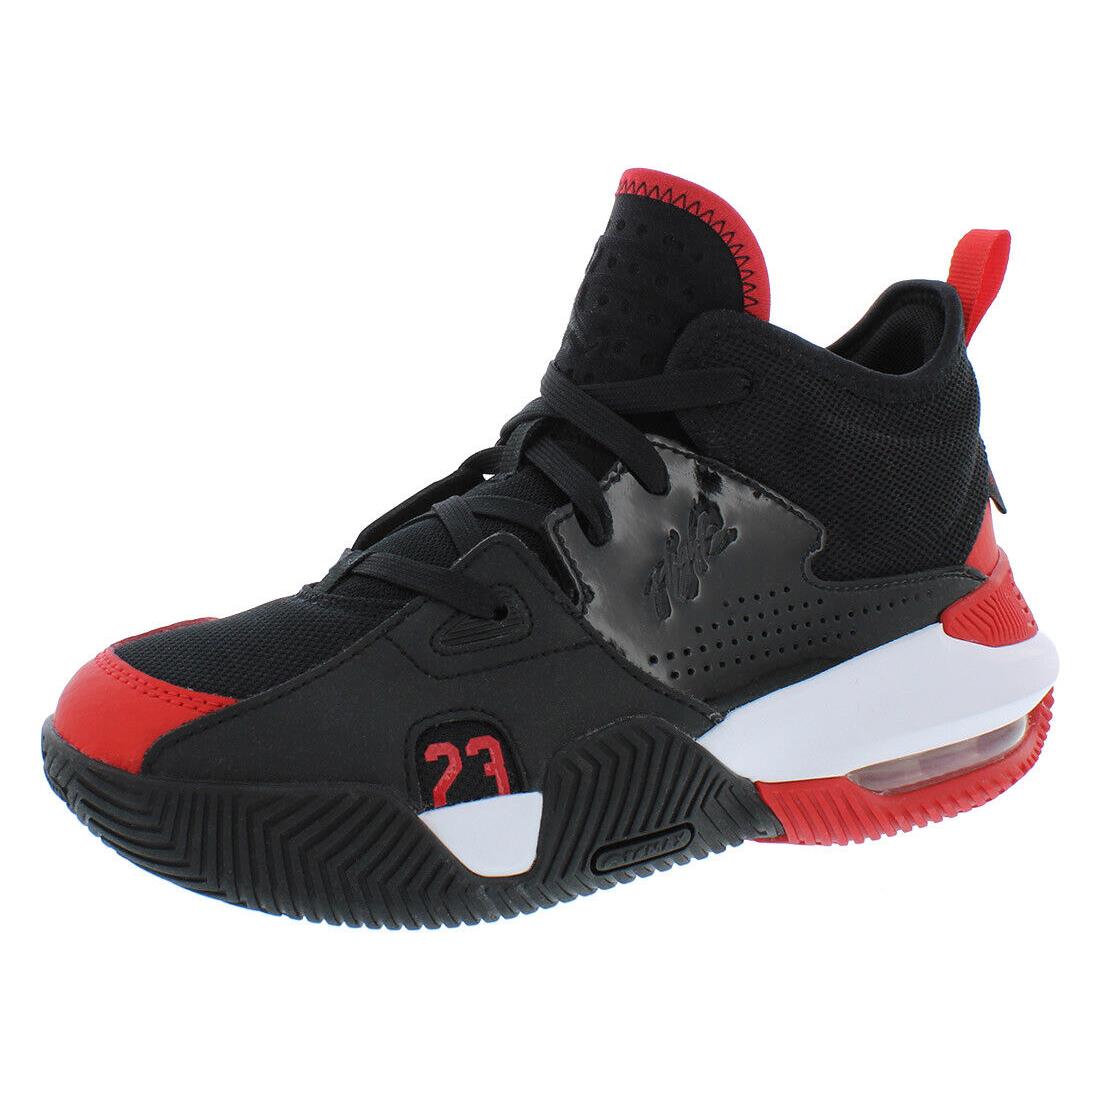 Nike Stay Loyal 2 GS Boys Shoes Size 6 Color: Black/university Red/white